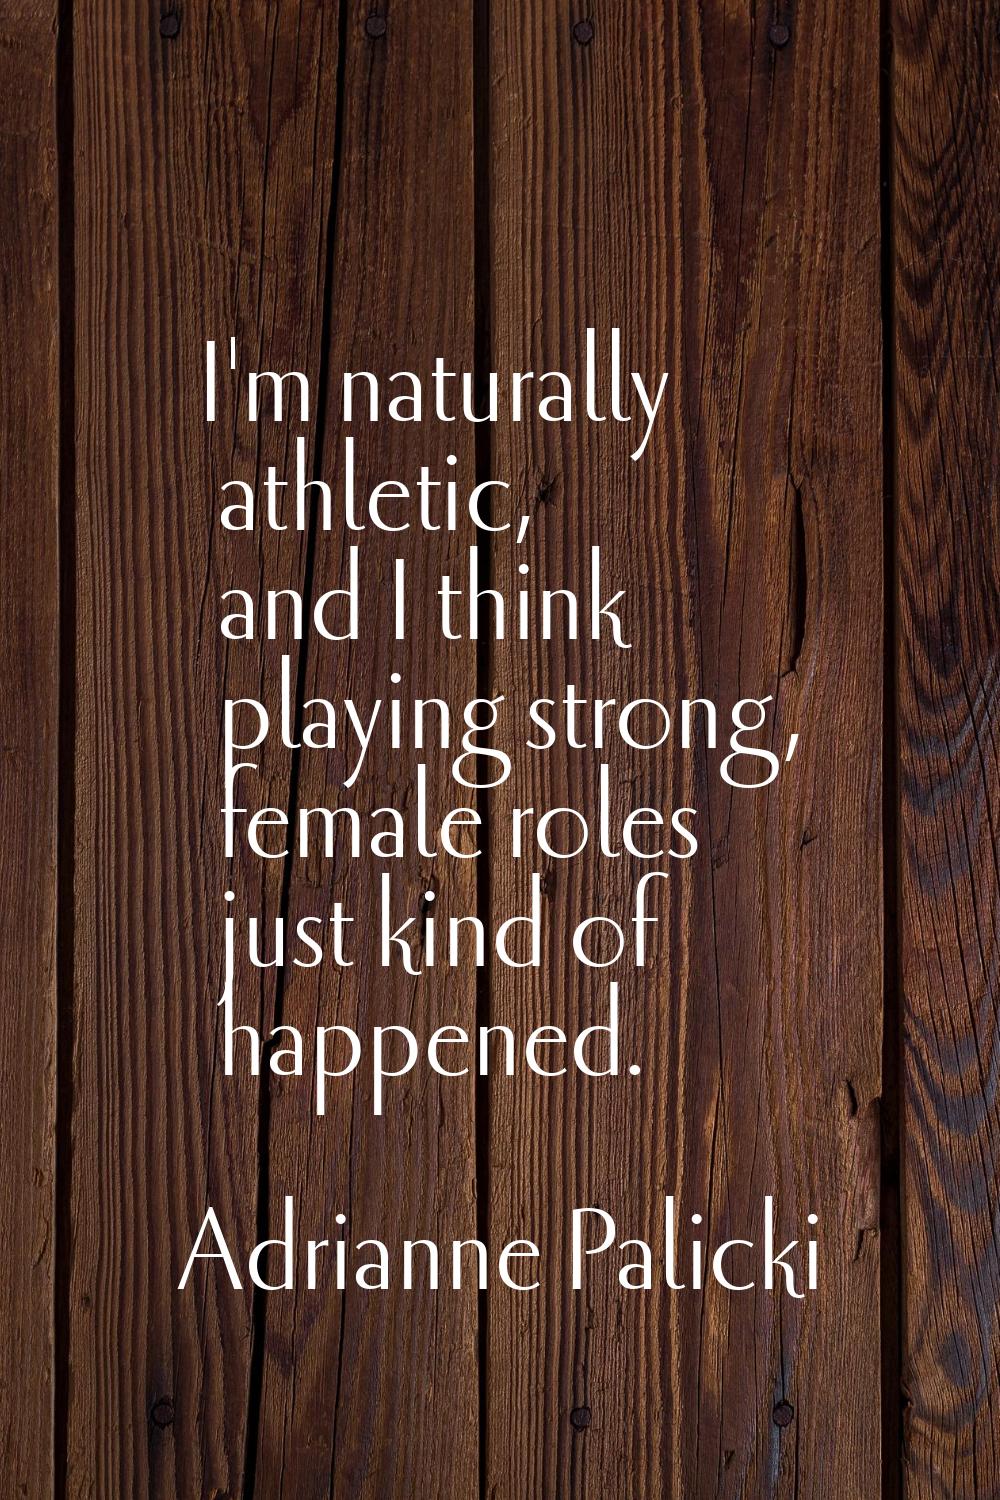 I'm naturally athletic, and I think playing strong, female roles just kind of happened.